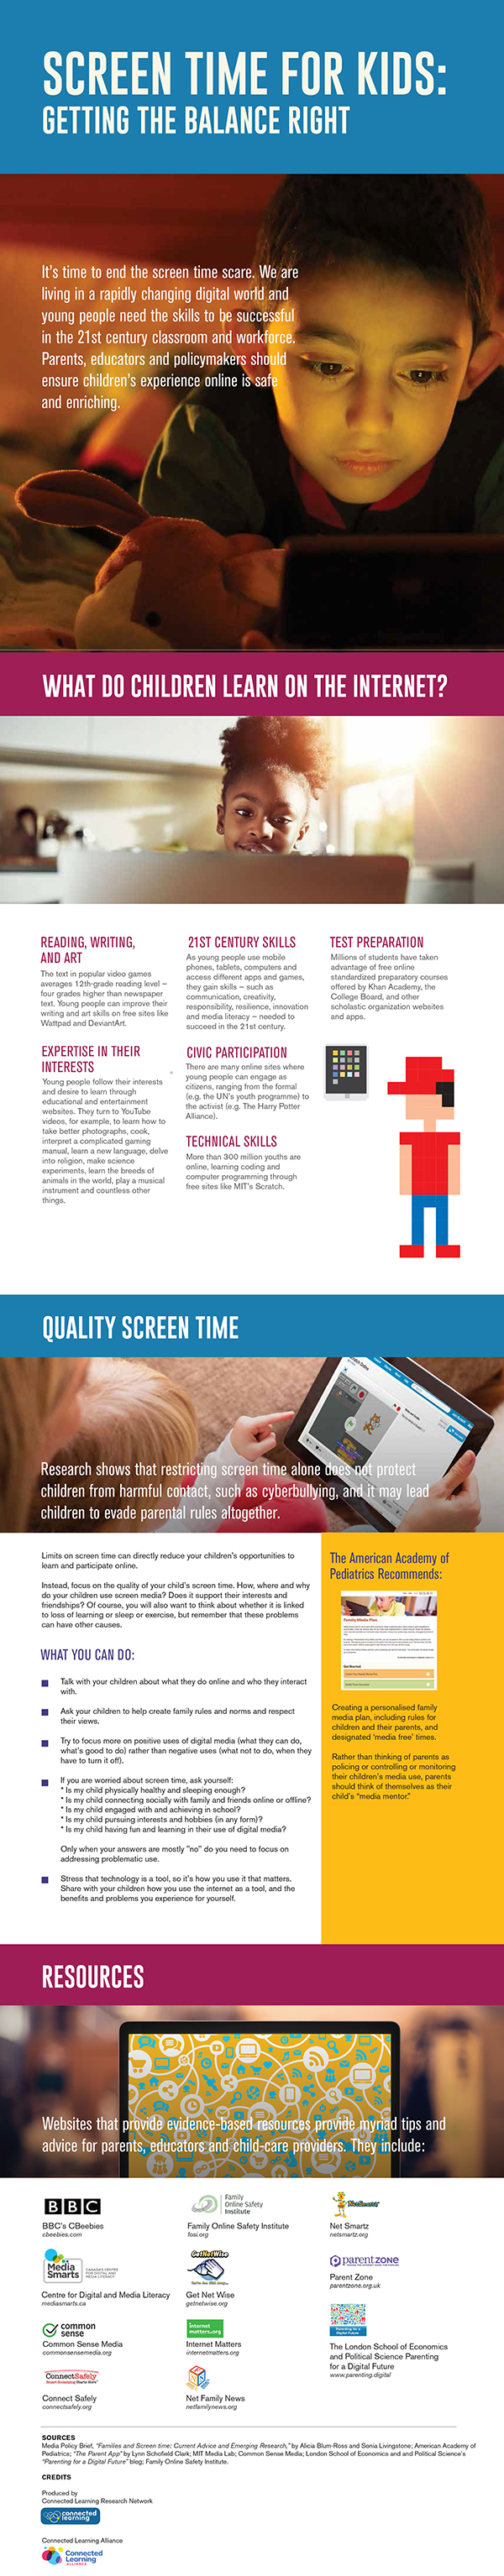 screen time infographic